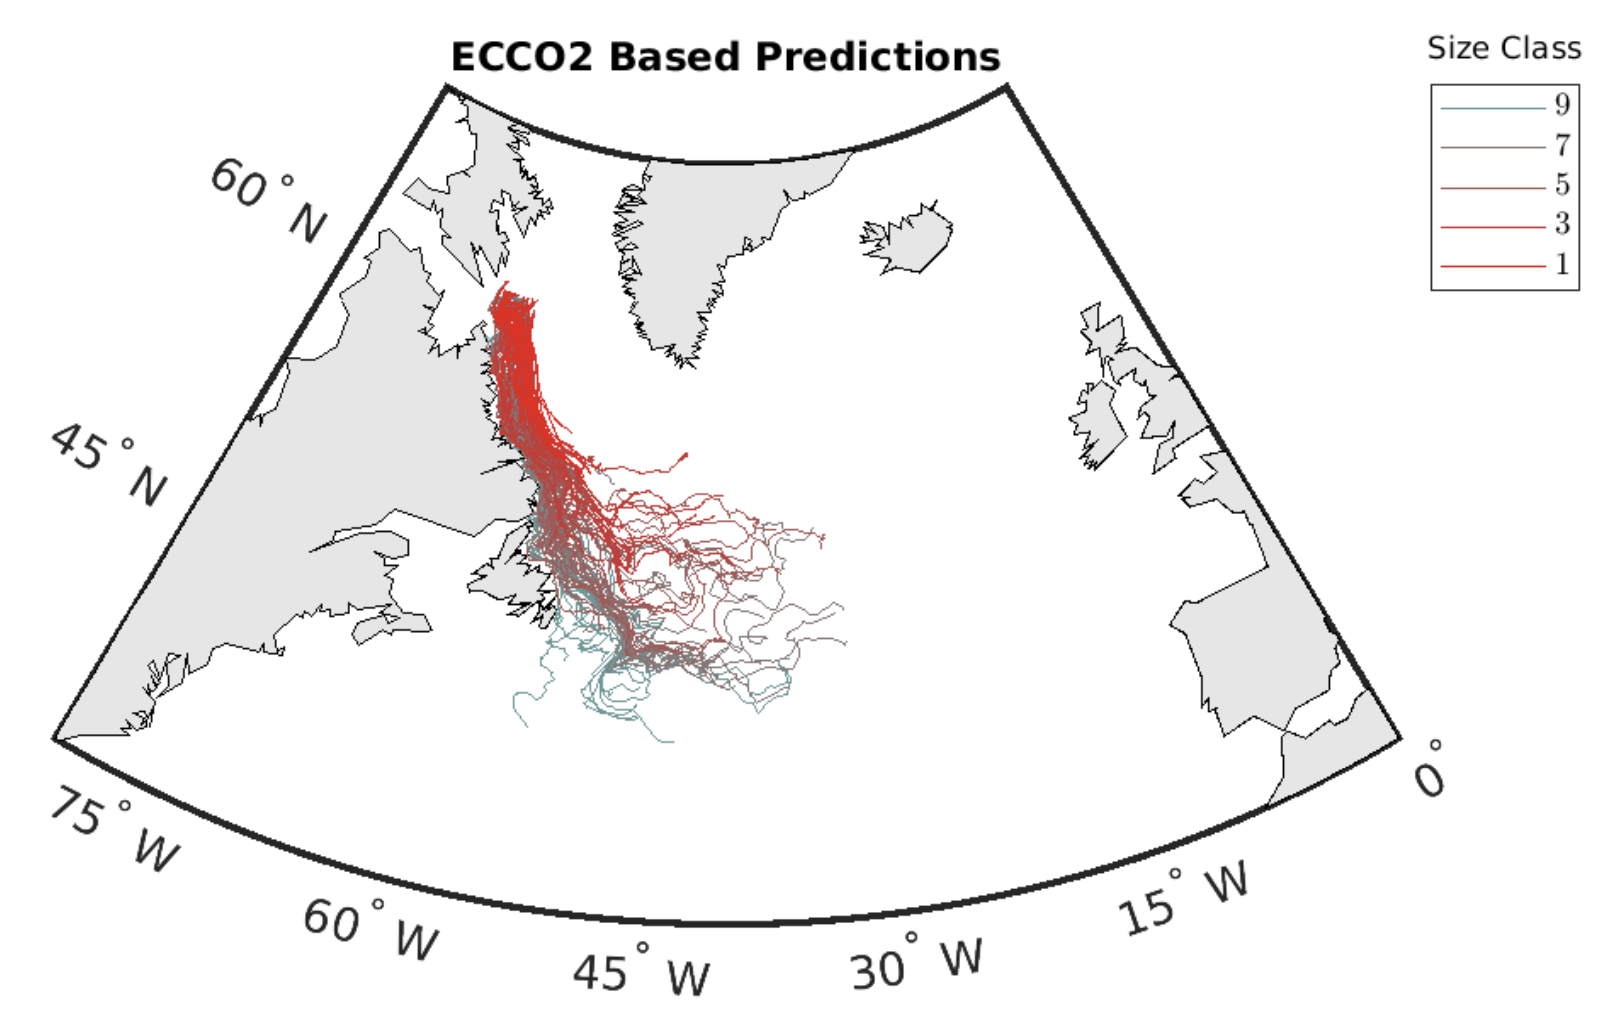 Wagner et al. model map output showing iceberg trails grouped by size class.